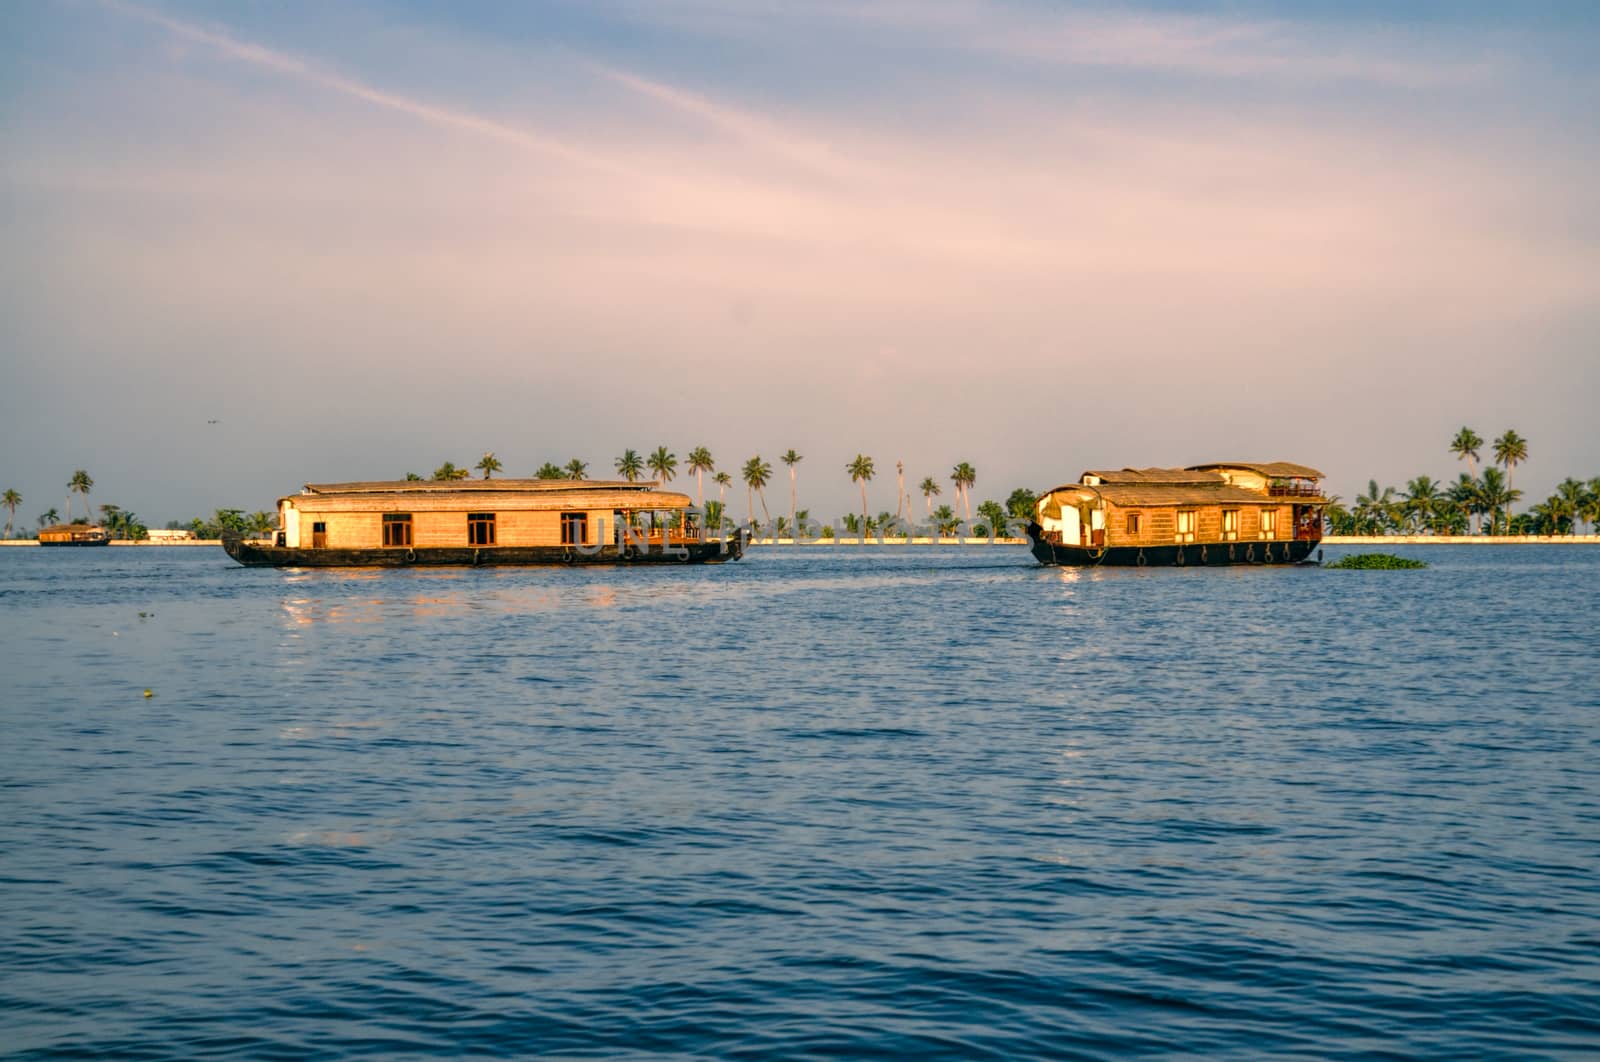 Houseboats in Alleppey by MichalKnitl